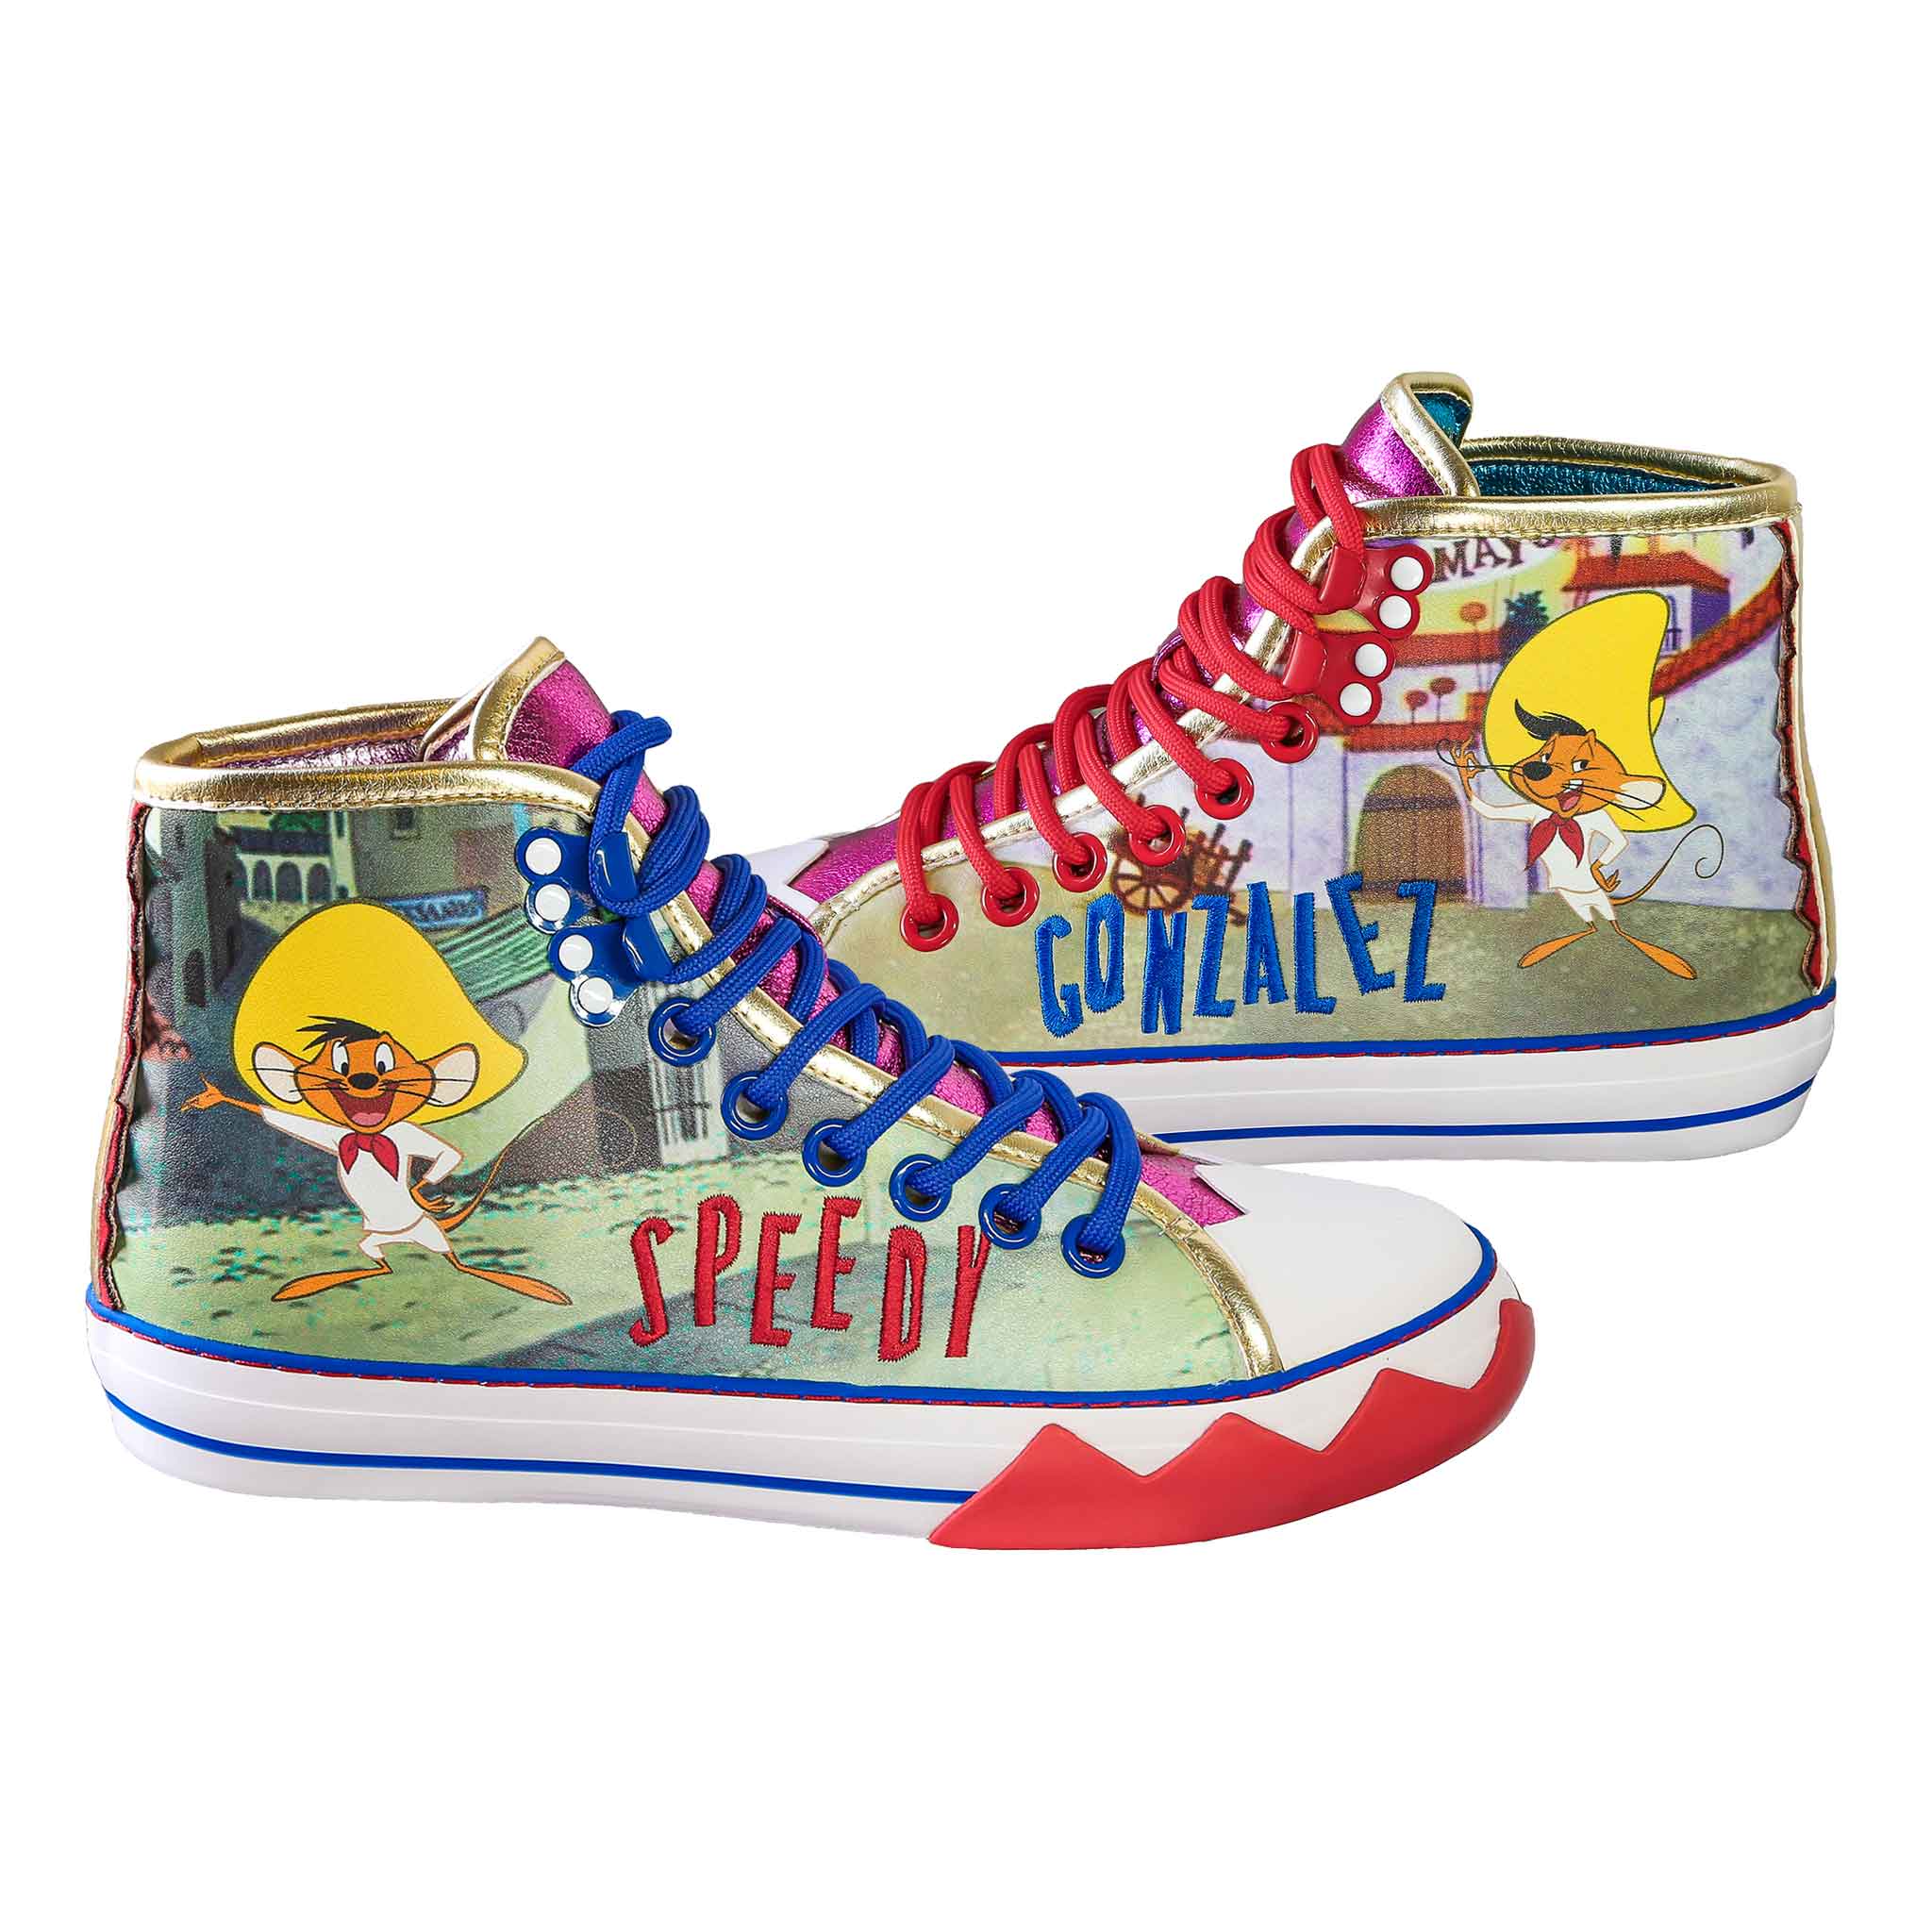 High top lace-up trainers with scenes from Looney Tunes containing Speedy Gonzalez and 'Speedy' embroidered in red on the right foot and 'Gonzalez' in blue on the left foot, the laces colours are the opposite way round.